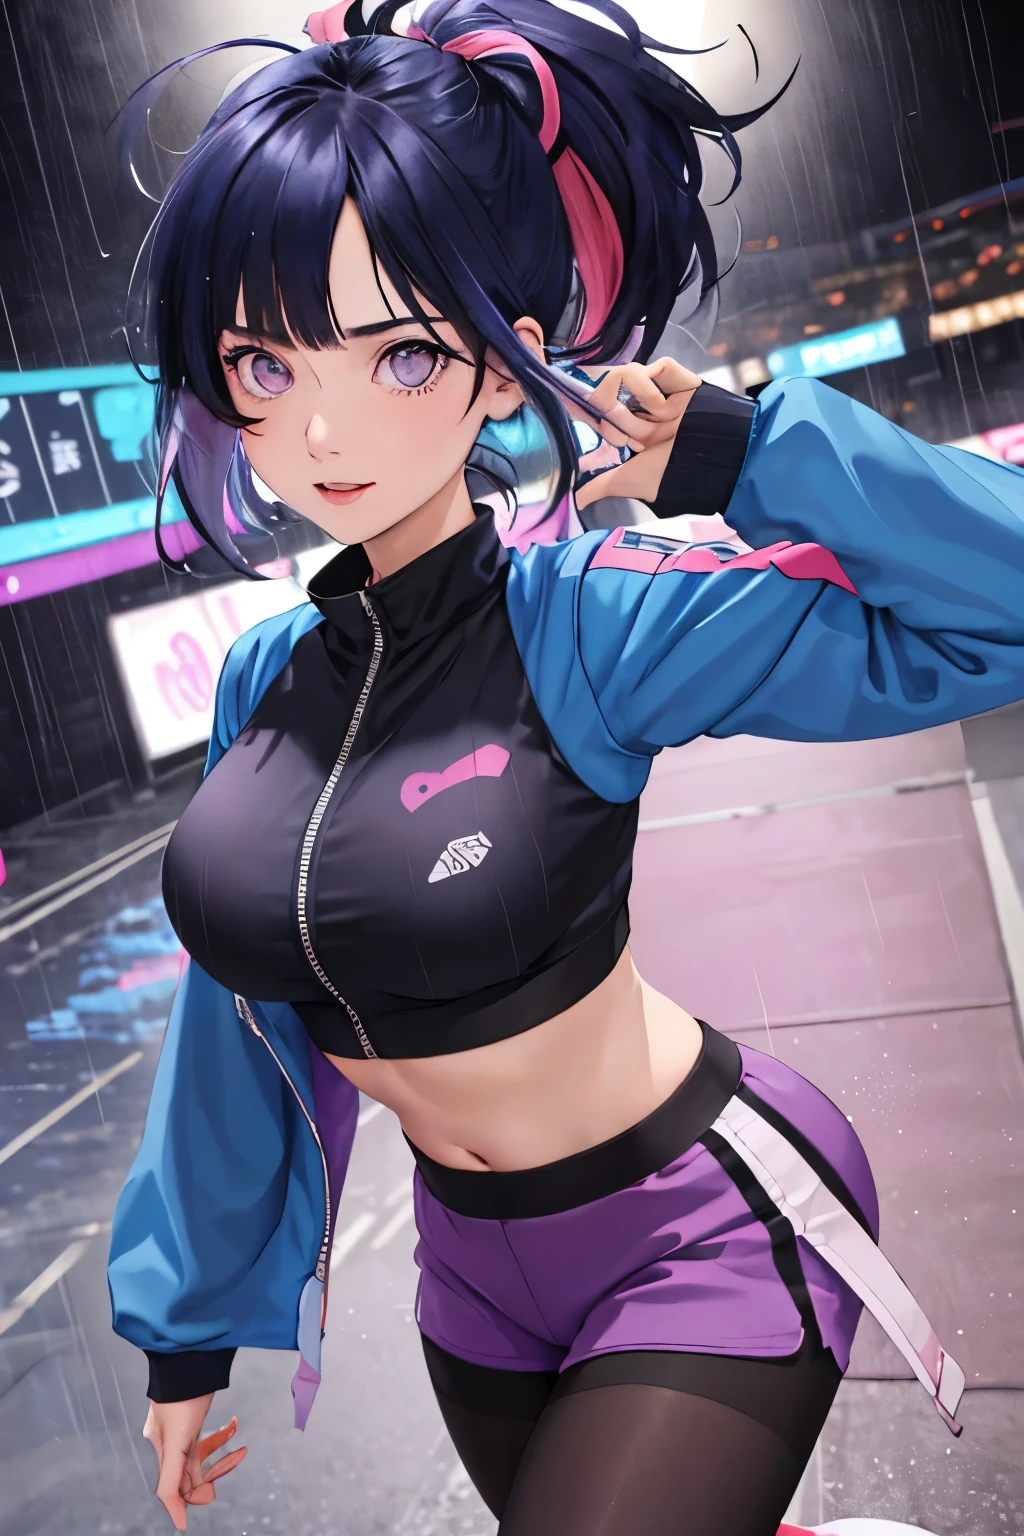 sportrait, 1 girl, pretty  face, Asymmetrical hair, multicolour hair, obi strip, Tights, Cover the navel, separated sleeves, a purple eye, Hip vents, Open jacket, cute big breasts, Just look at the audience, nightcity, neon, It's raining, bluntbangs,dark-blue hair